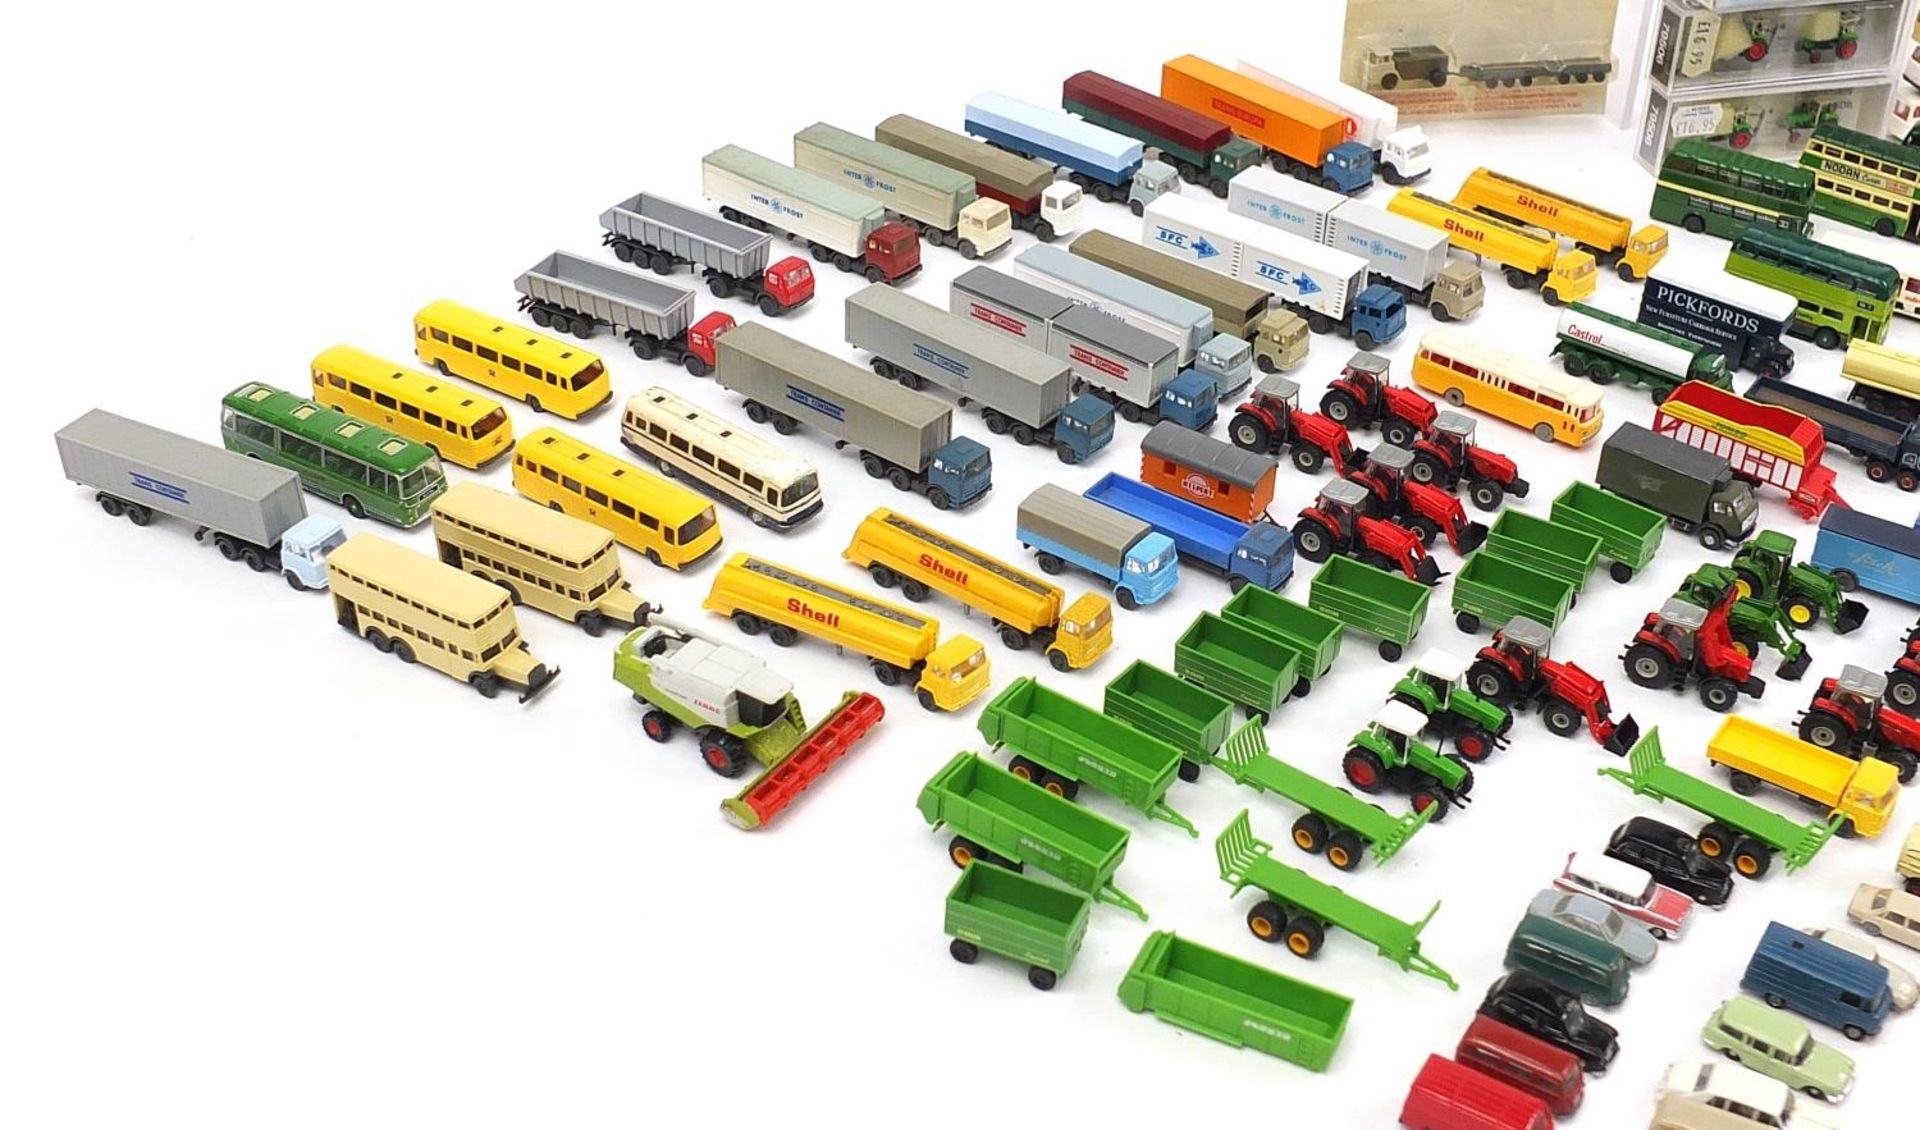 Large collection of N gauge model railway advertising vehicles, freight containers and accessories - Image 2 of 9